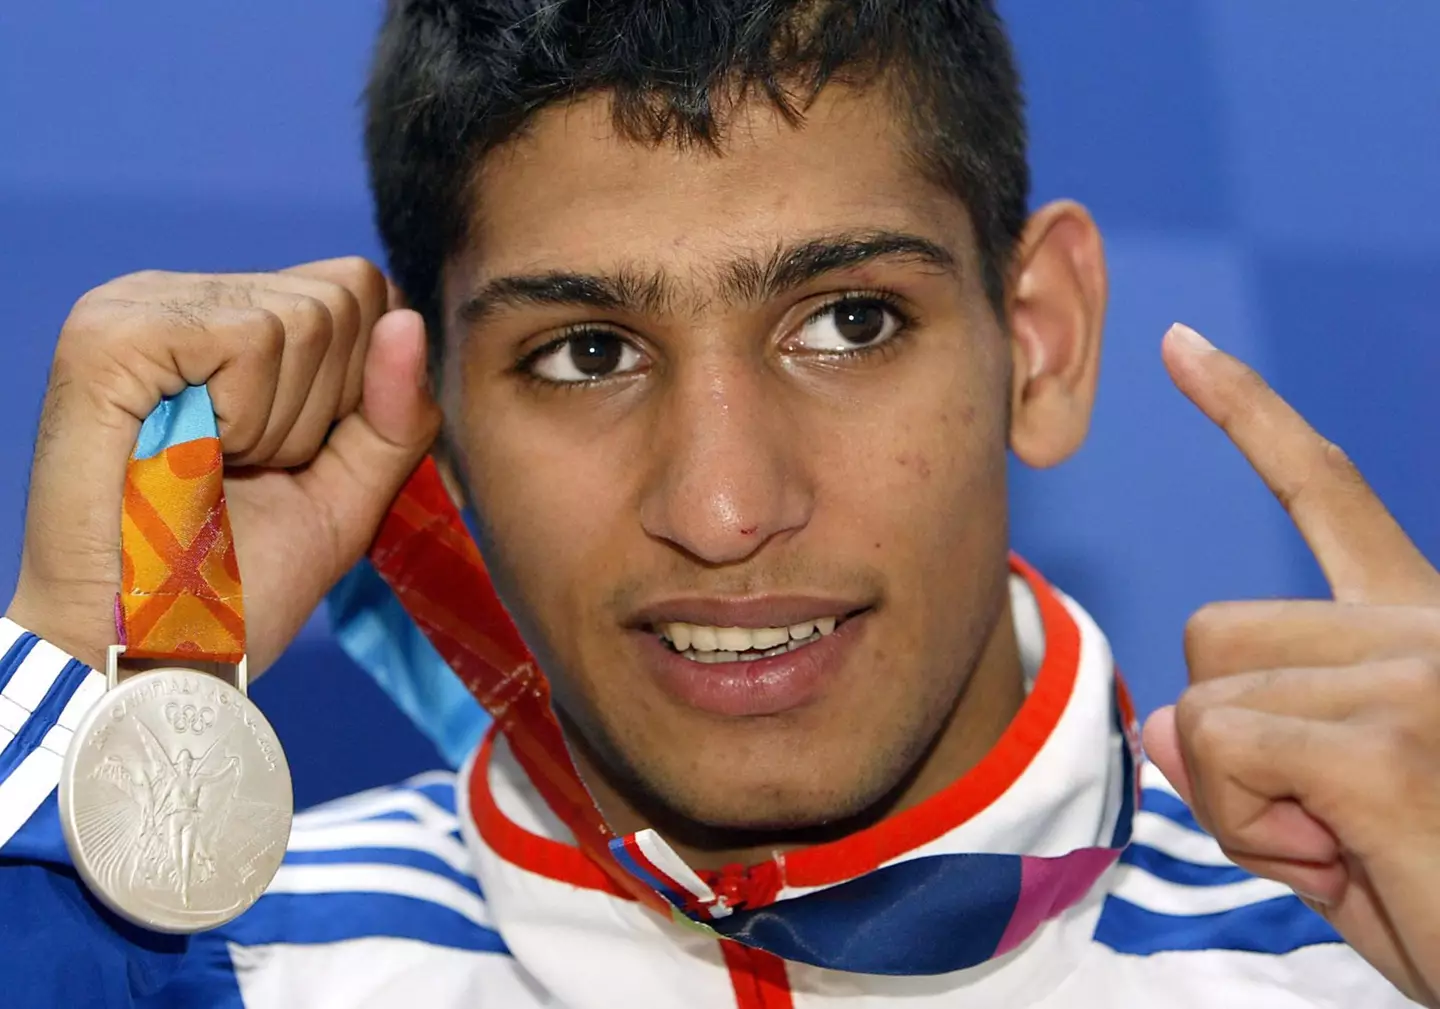 Khan won a silver medal at the Athens Olympic Games in 2004 (Image: PA)